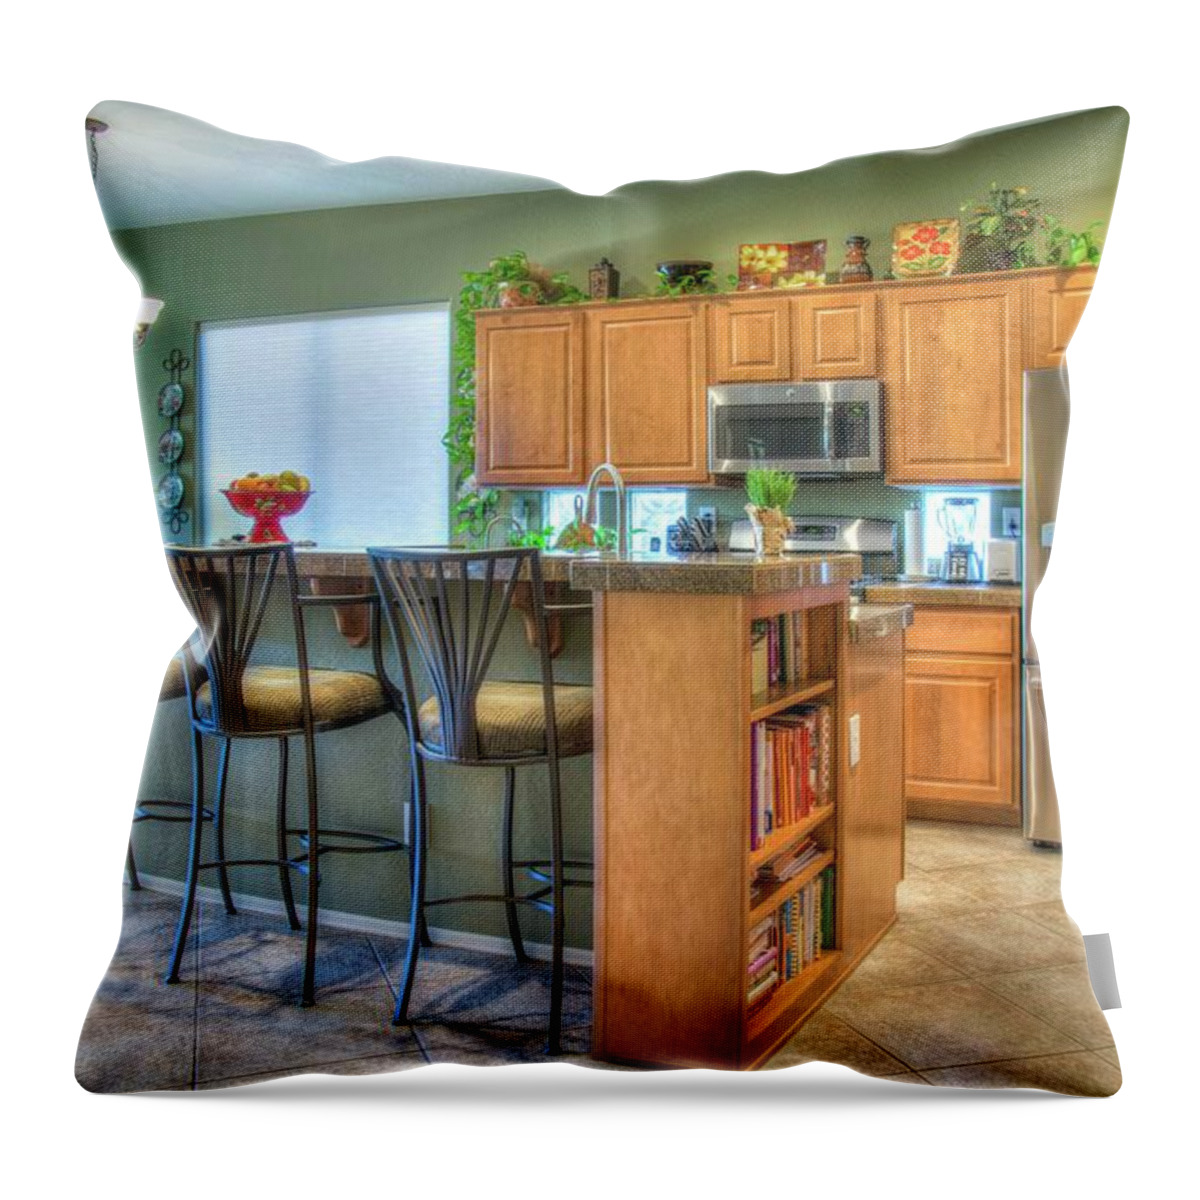 Realty Throw Pillow featuring the photograph Realty 03 by Will Wagner